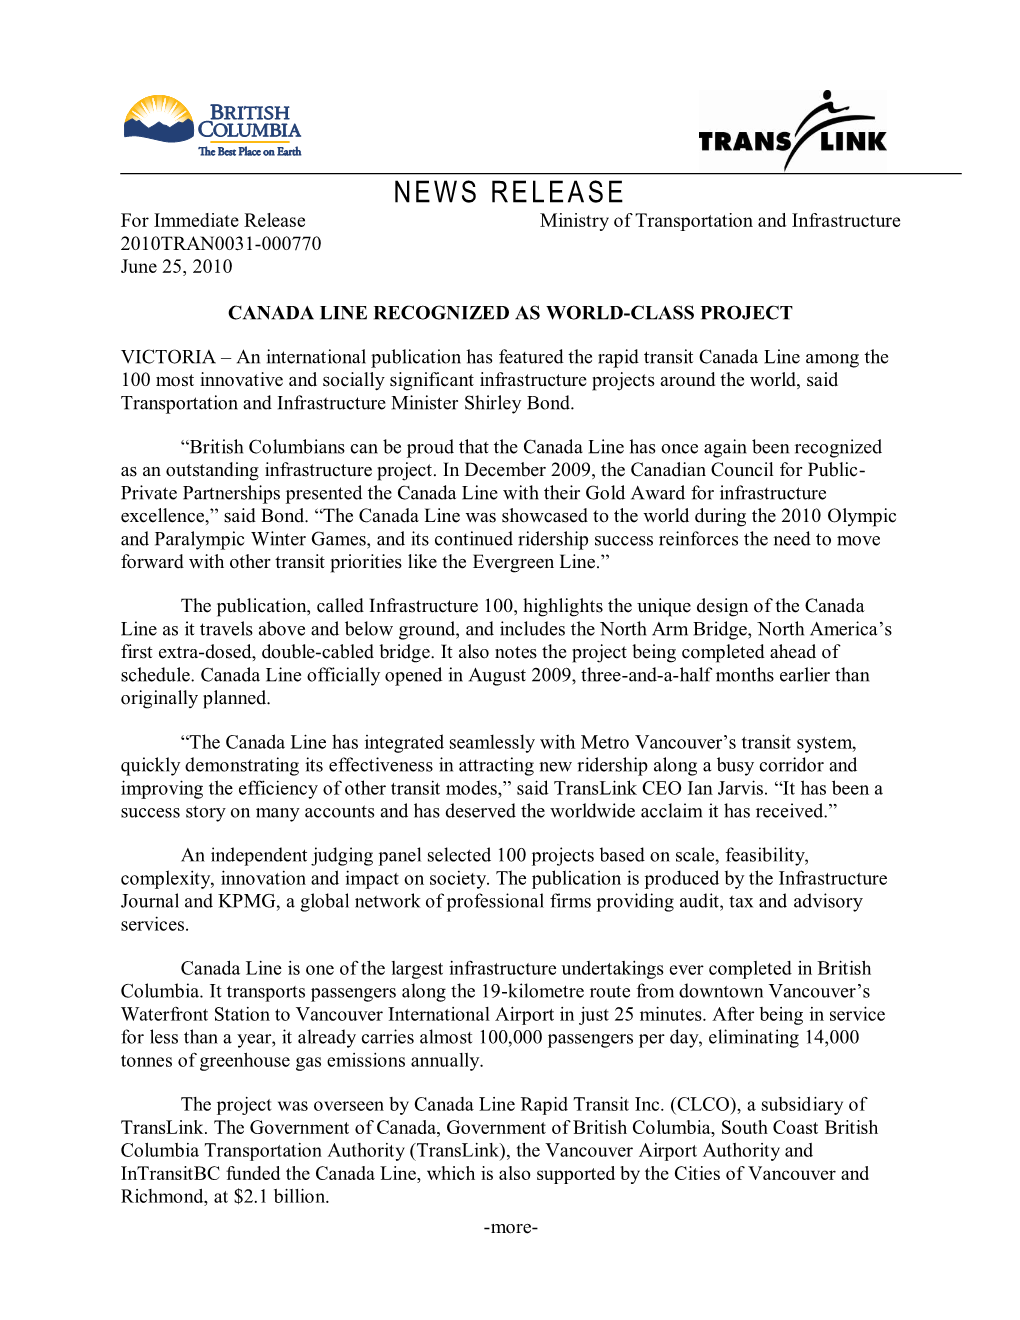 NEWS RELEASE for Immediate Release Ministry of Transportation and Infrastructure 2010TRAN0031-000770 June 25, 2010